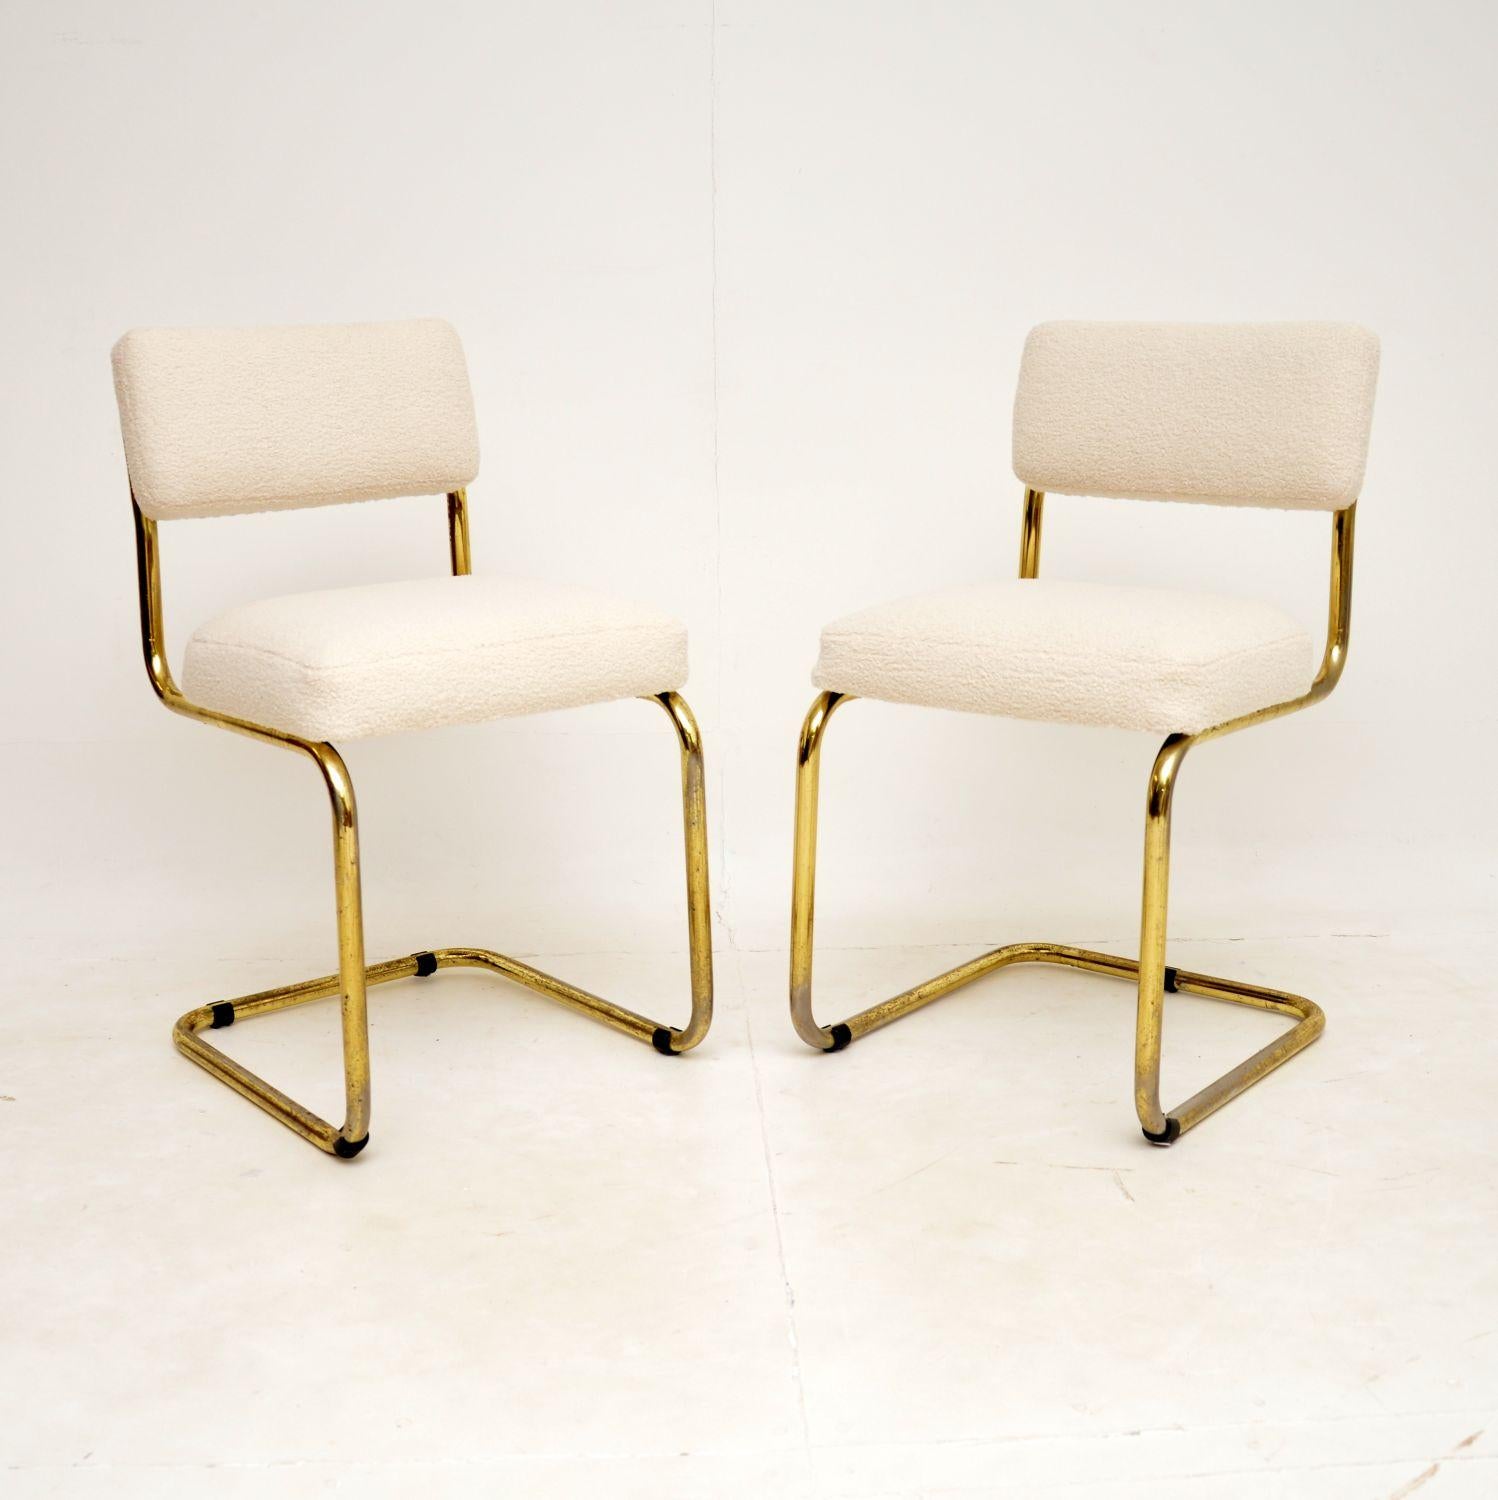 A stunning and very comfortable pair of vintage cantilever dining chairs with brass frames. They were likely made in Italy, and they date from the 1970’s.

They are very well made, sturdy and supportive. The brass frames have some surface wear and